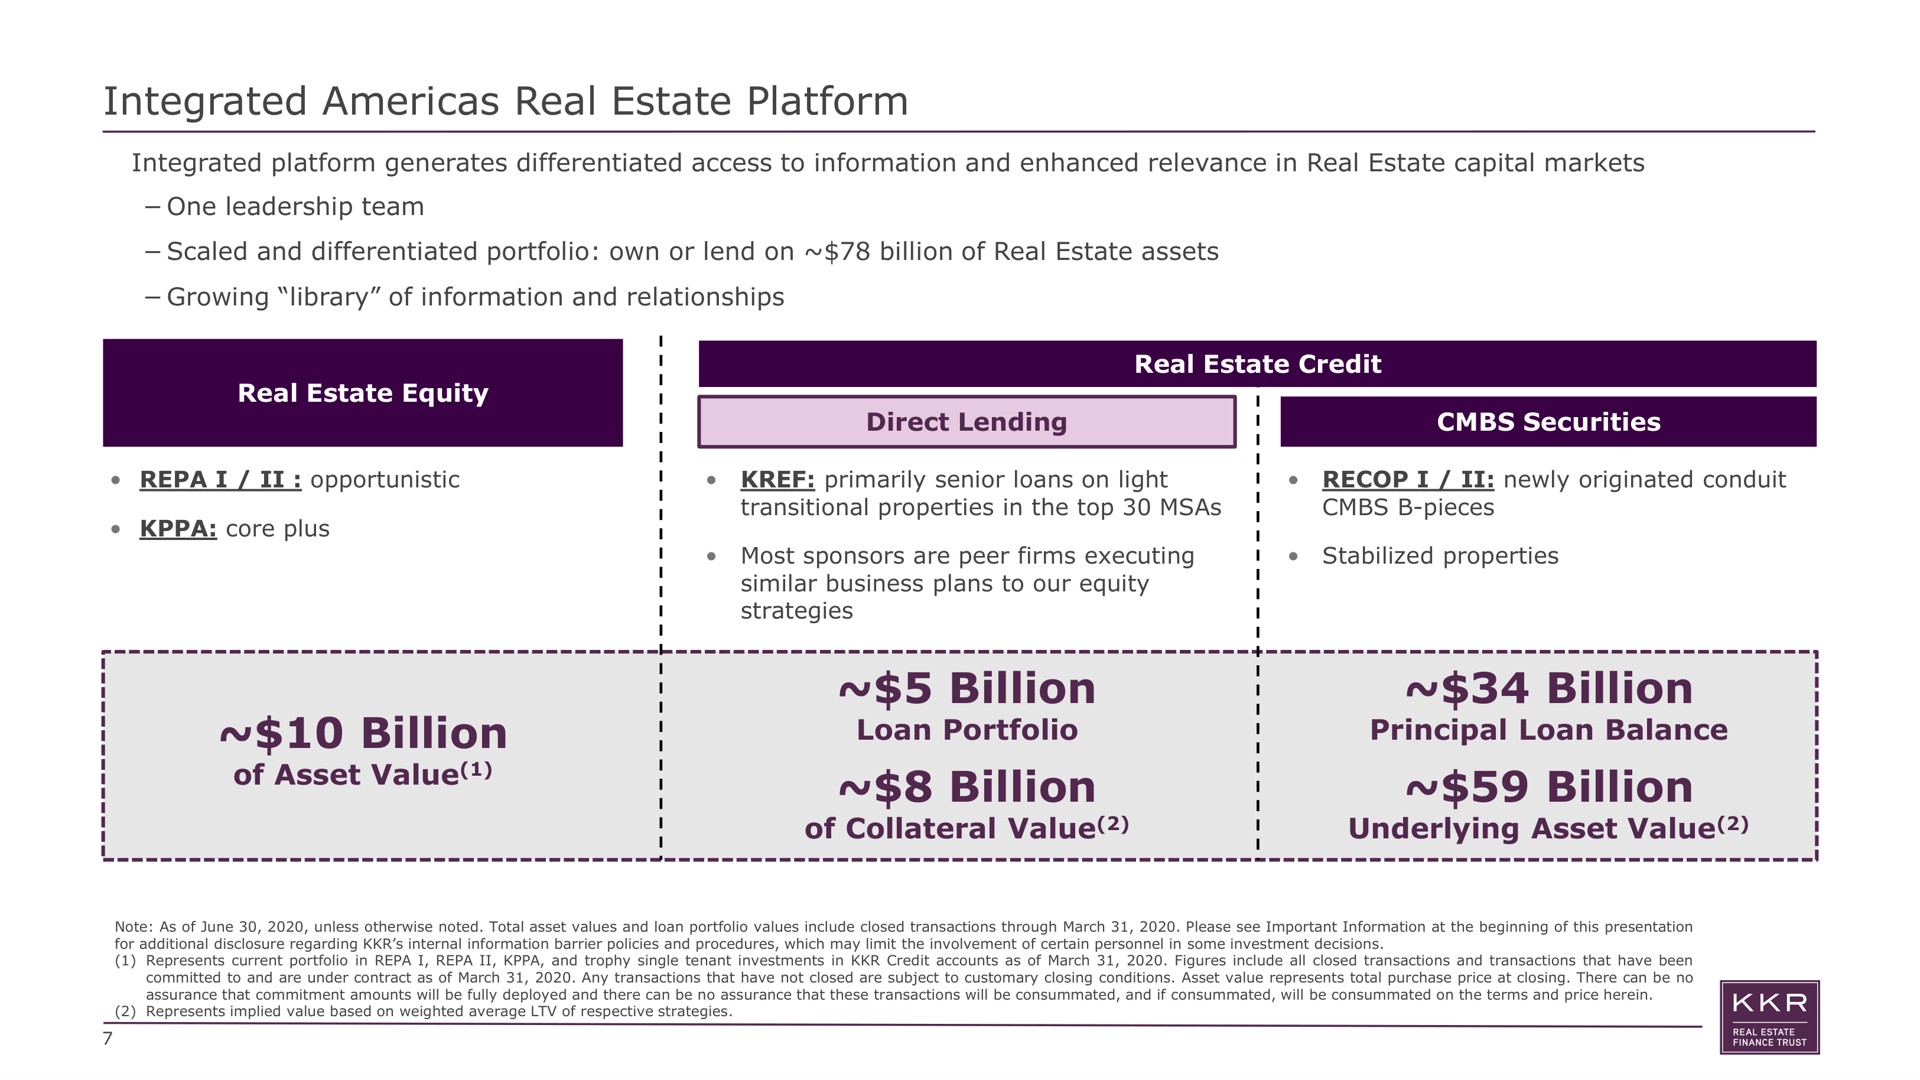 integrated real estate platform billion of asset value billion loan portfolio billion of collateral value billion principal loan balance billion underlying asset value generates differentiated access to information and enhanced relevance in capital markets one leadership team scaled and differentiated own or lend on assets growing library information and relationships equity credit direct lending securities | KKR Real Estate Finance Trust